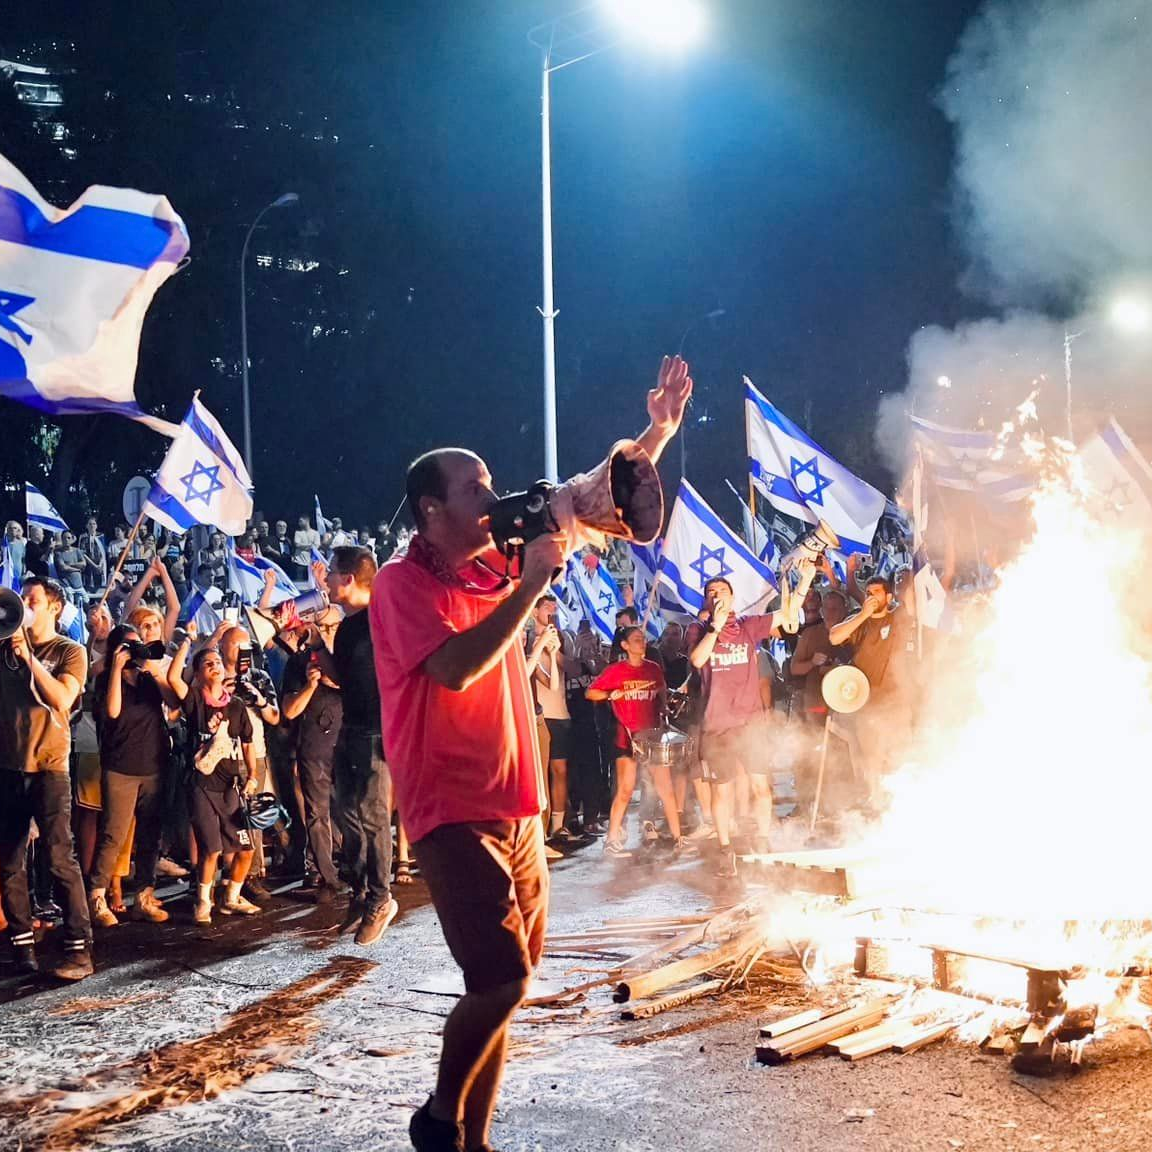 One of the many rallies of the Israeli democracy protest movement (protesters with Israel's flag gathered around a bonfire, stopping traffic on a highway). Photo: Itai Raziel.